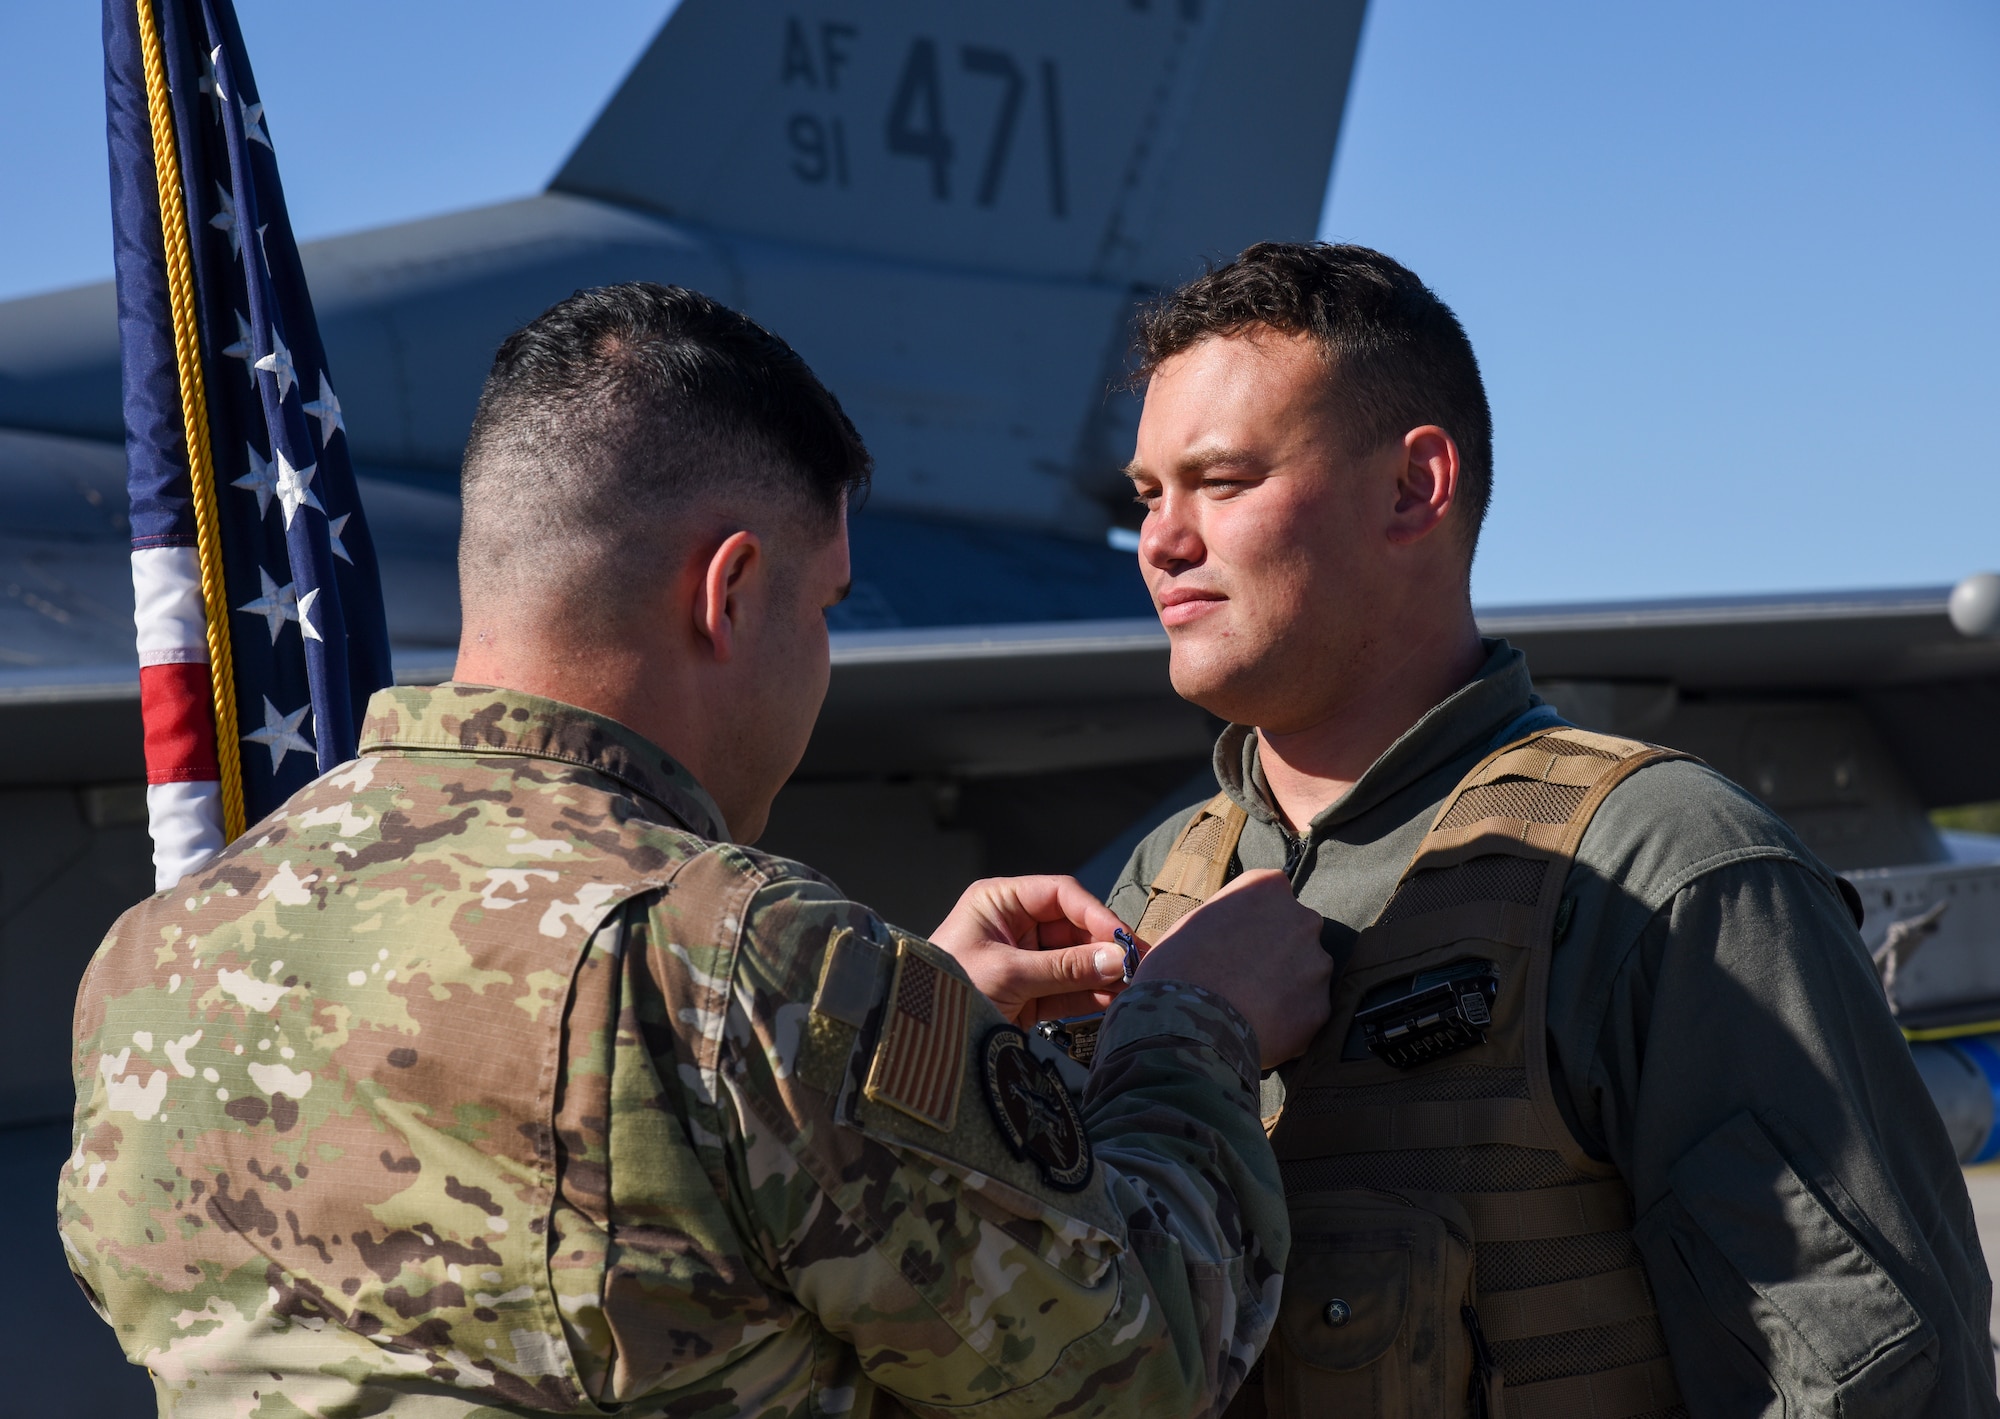 13th FGS Airman recognized for responding to vehicle accident during RF-A 22-3